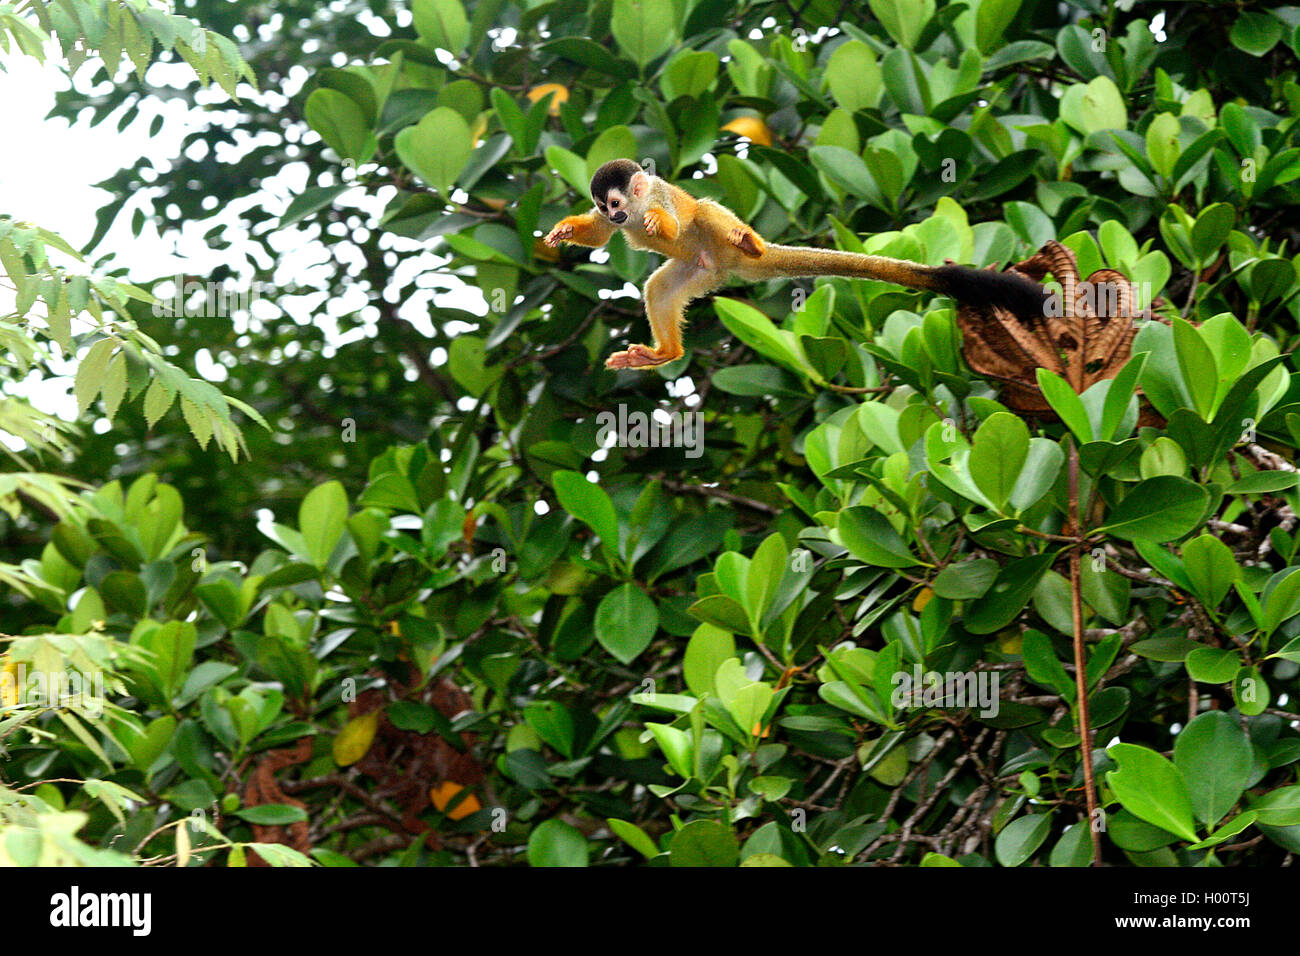 red-backed squirrel monkey, Central American squirrel monkey (Saimiri oerstedii), jumps from one tree to an other one, Costa Rica Stock Photo